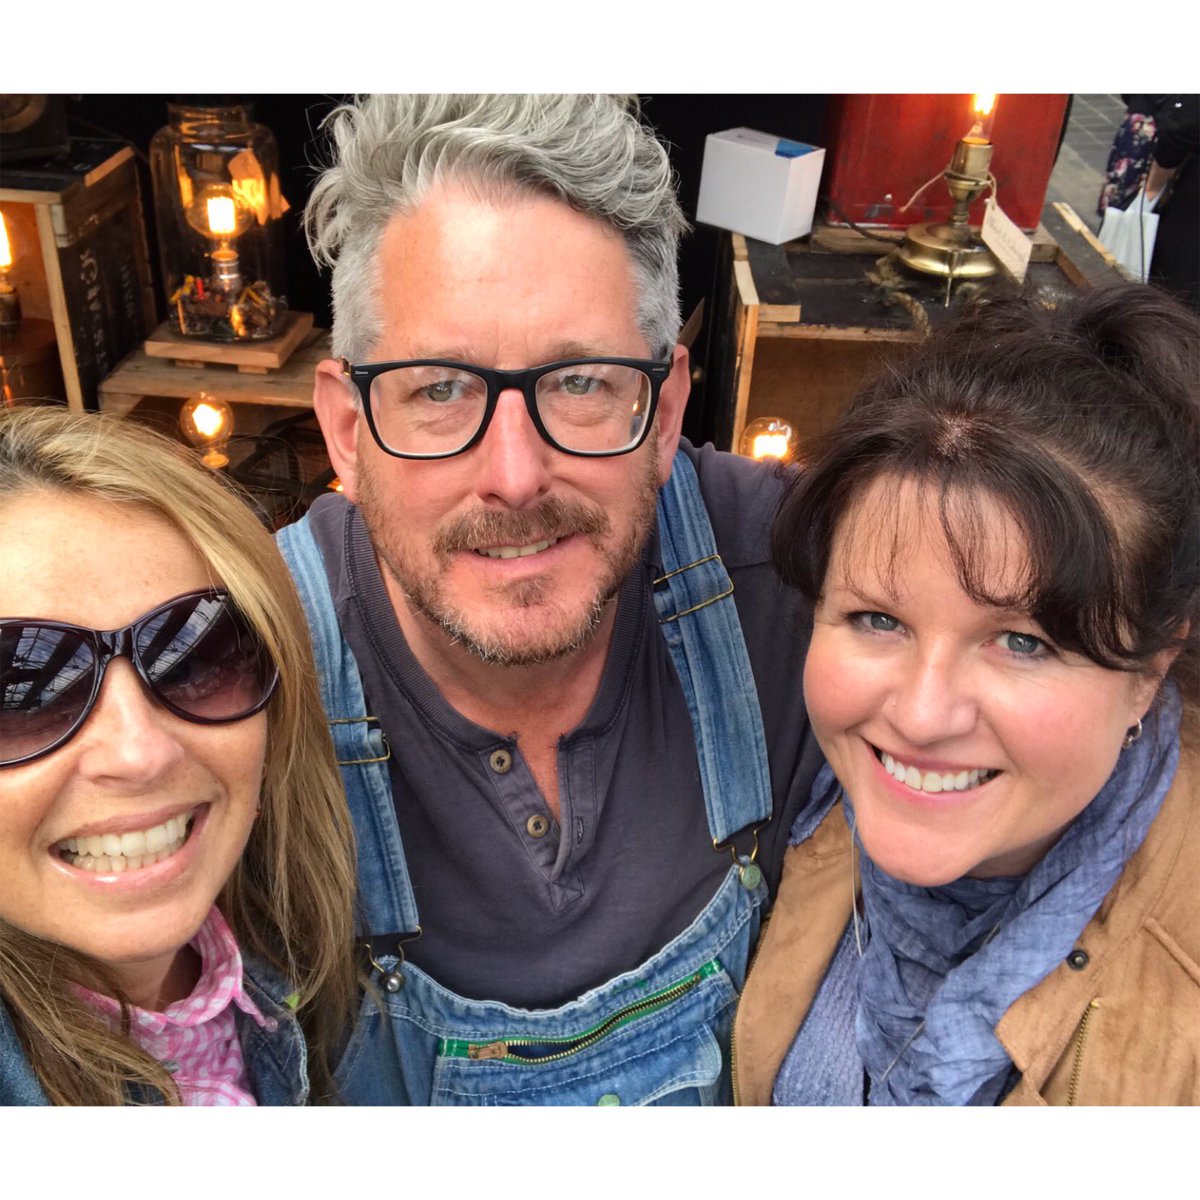 @silverbubble27 @AandE_Emporium lovely to see you both today 💗⭐️ #greenwichmarket #uniquelighting #friends